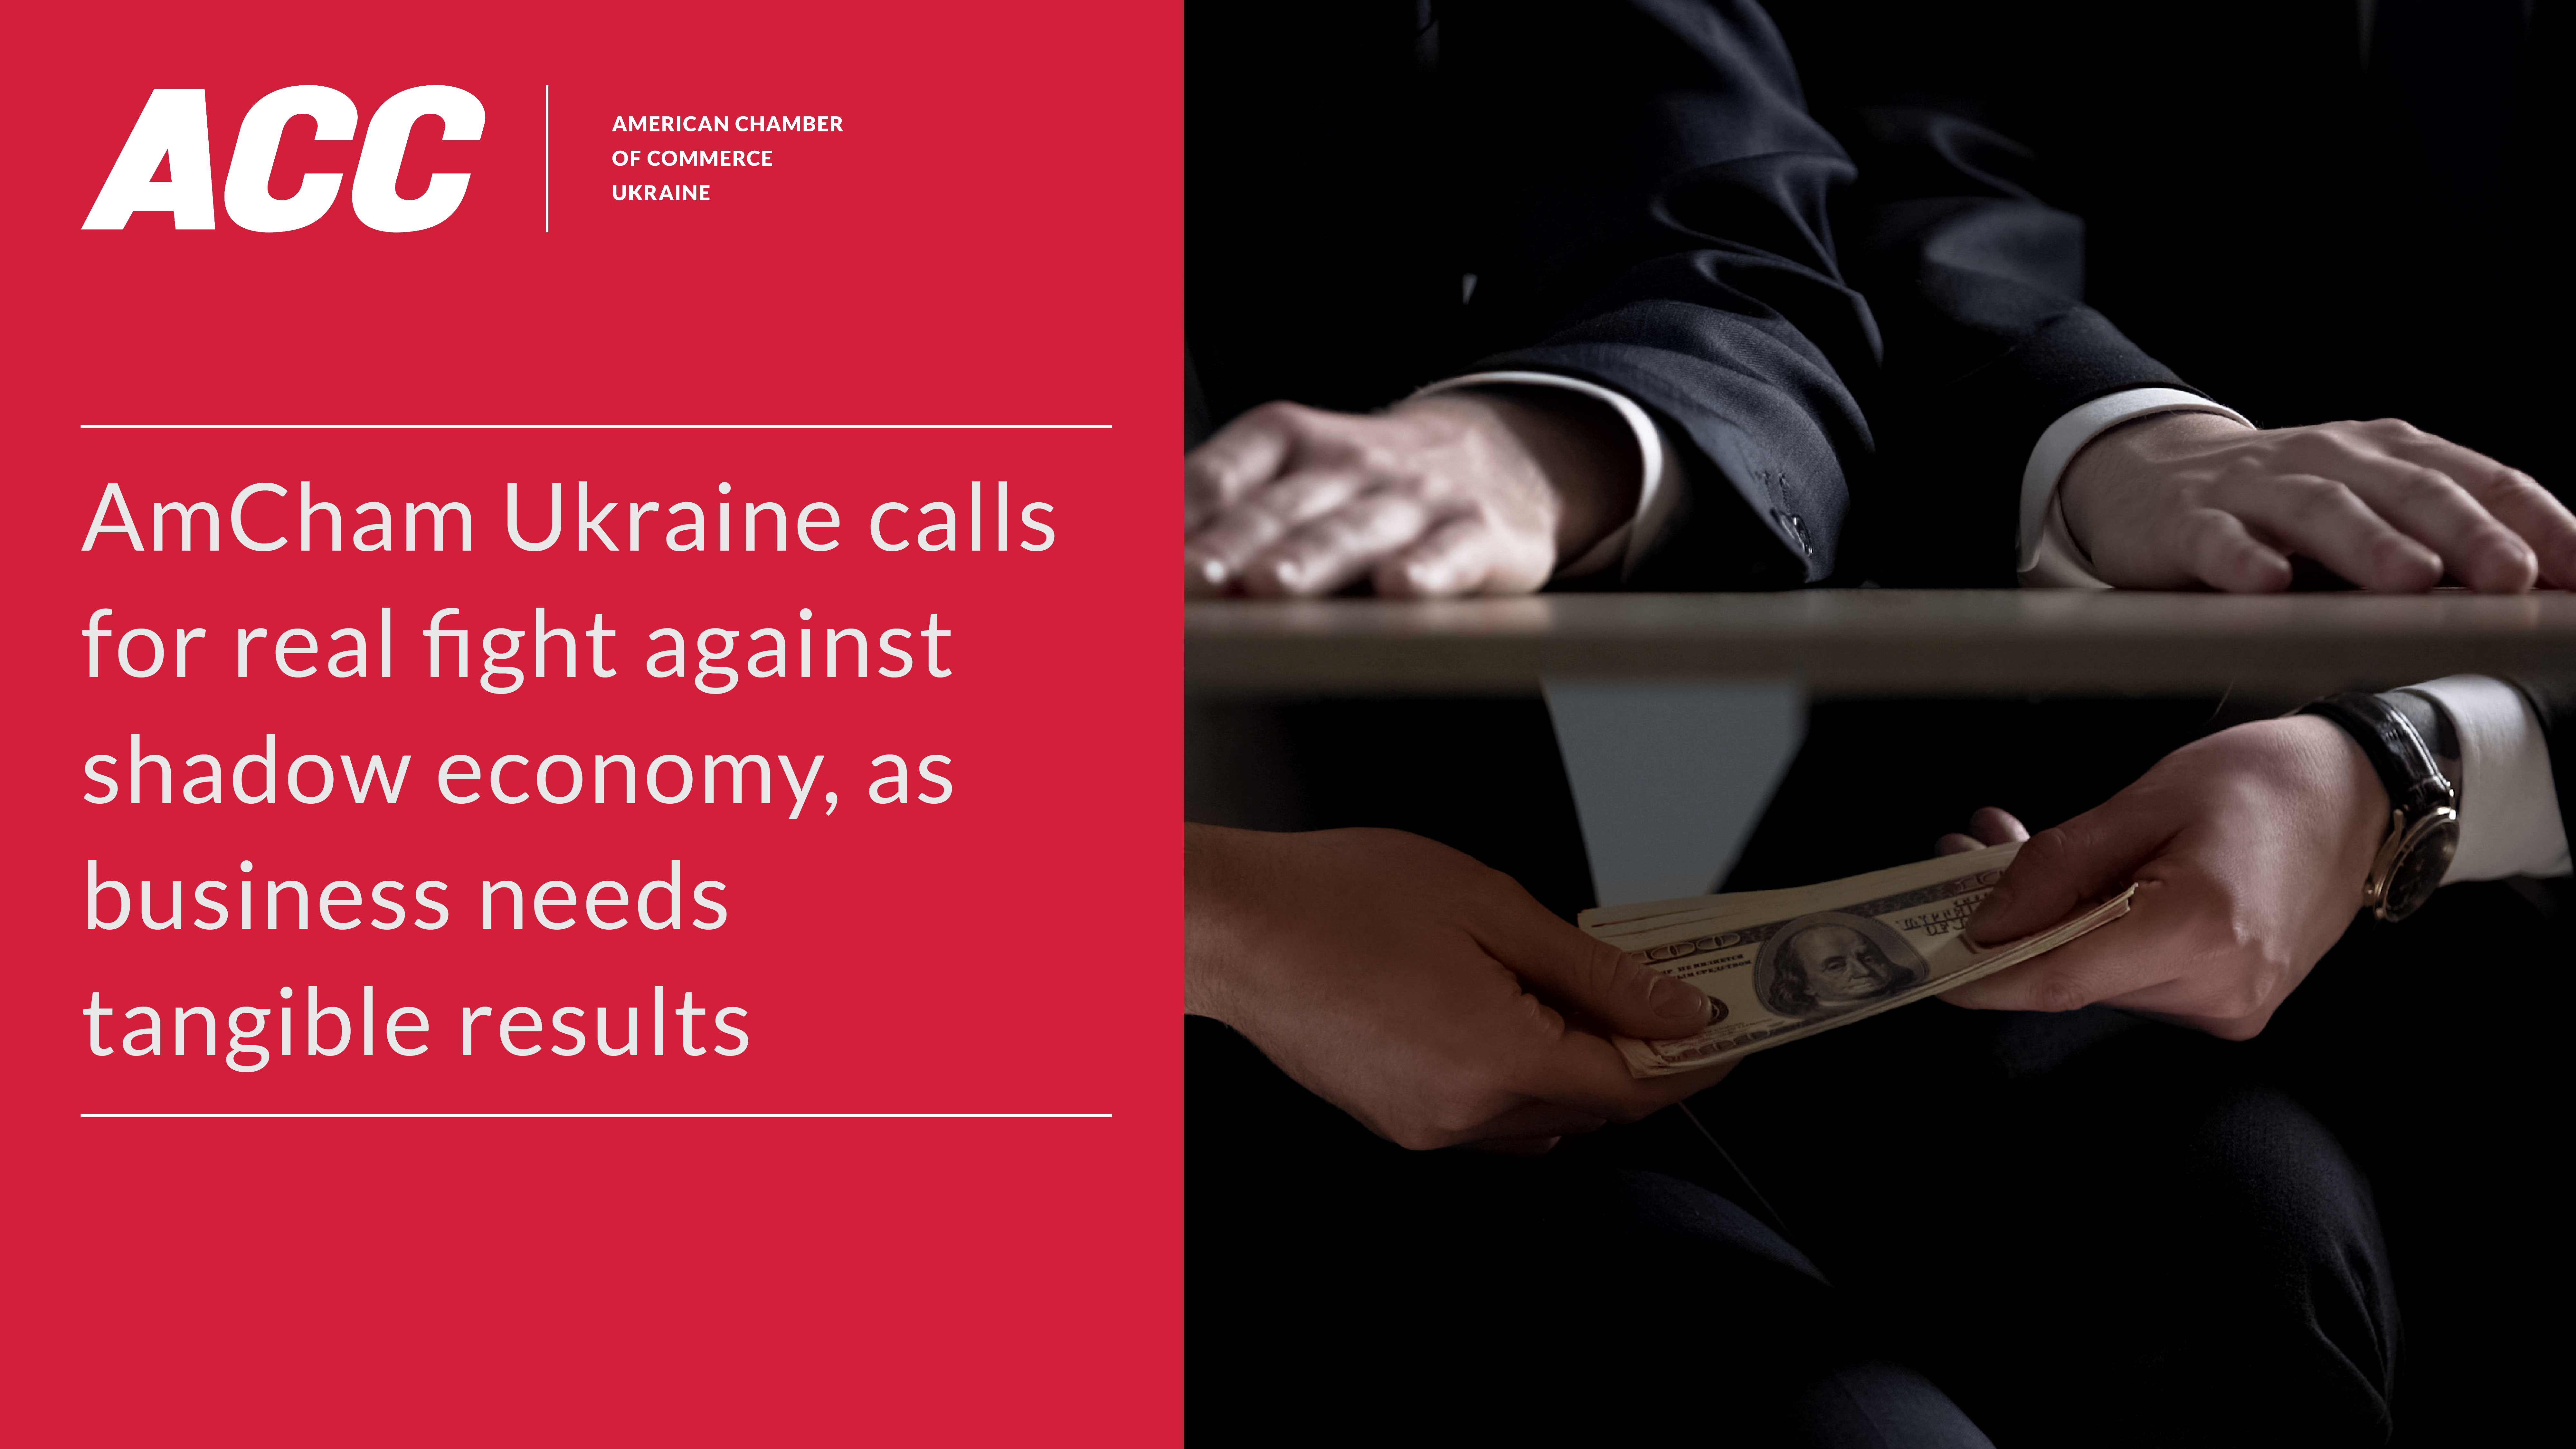 AmCham Ukraine calls for real fight against shadow economy, as business needs tangible results